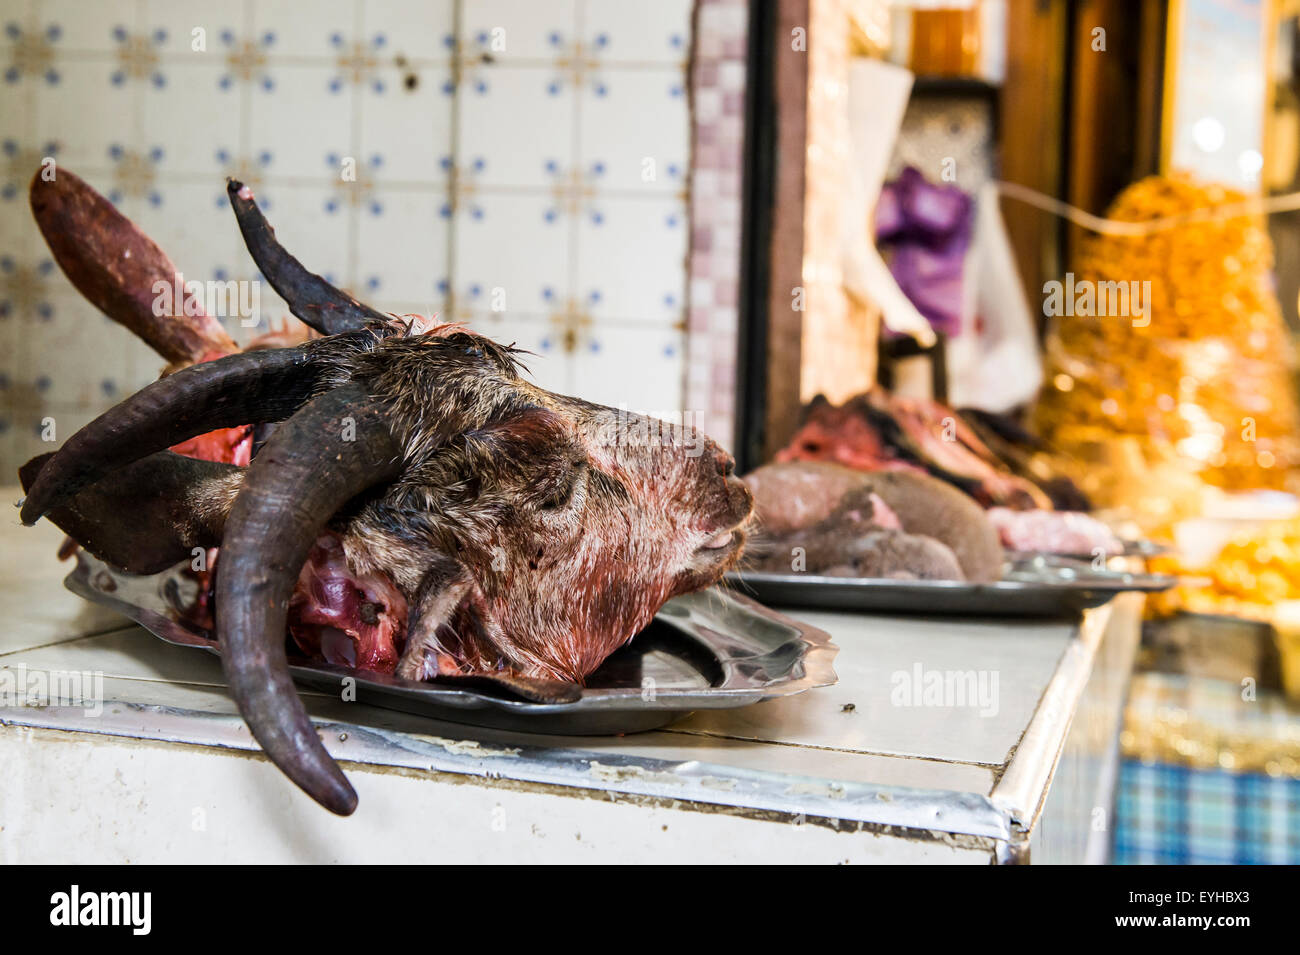 Butcher's with goat head on display, Souk, Fes, Morocco Stock Photo